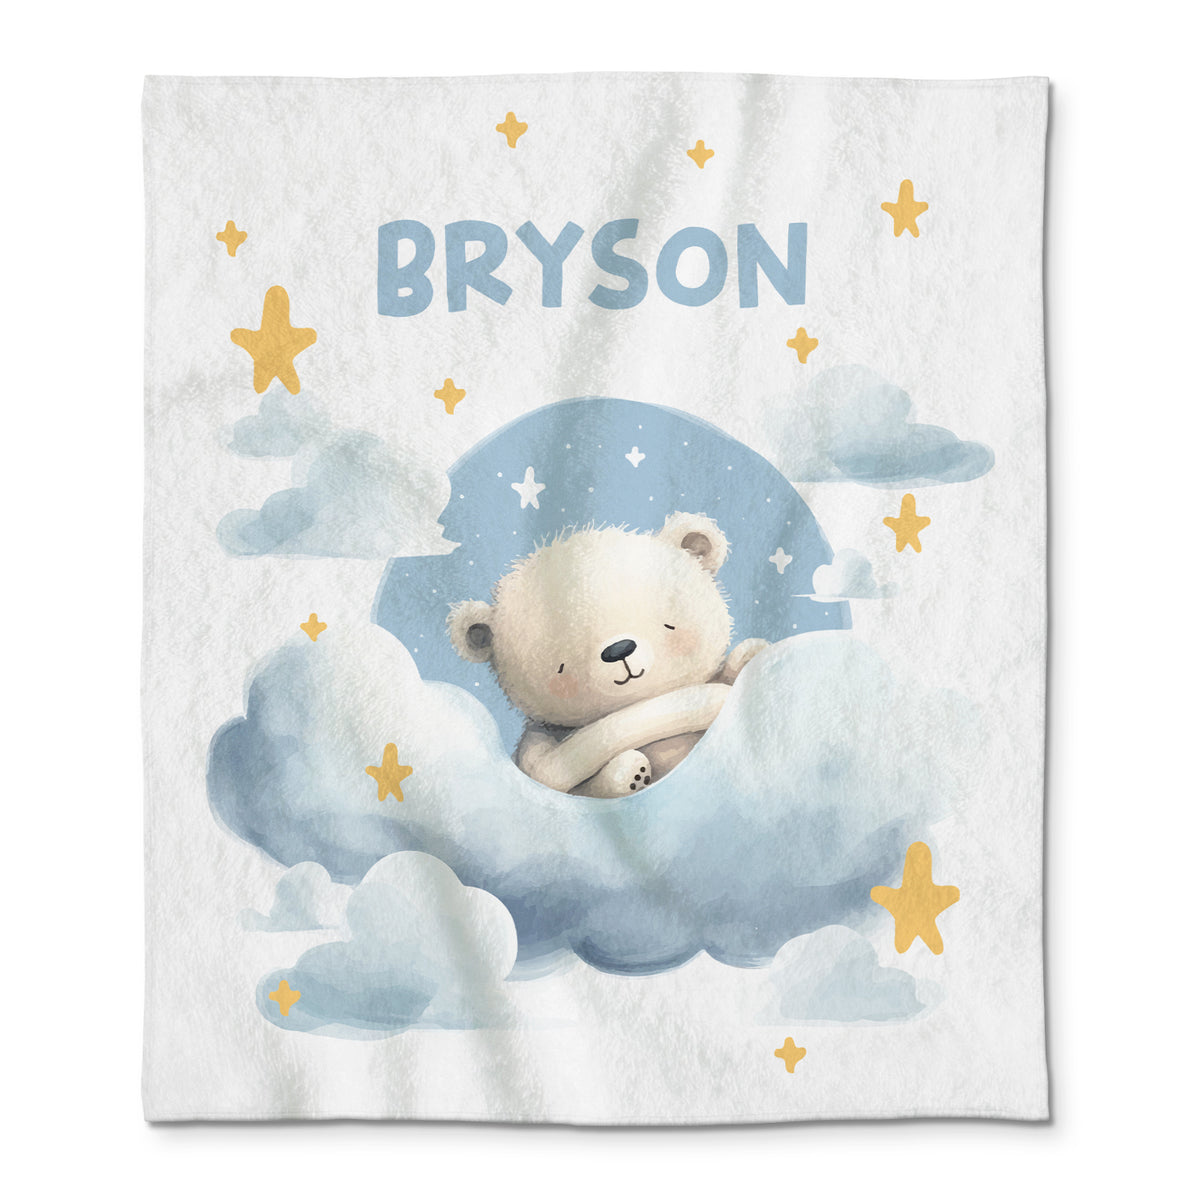 Personalized baby Blankets With Name Super Soft and Cuddly